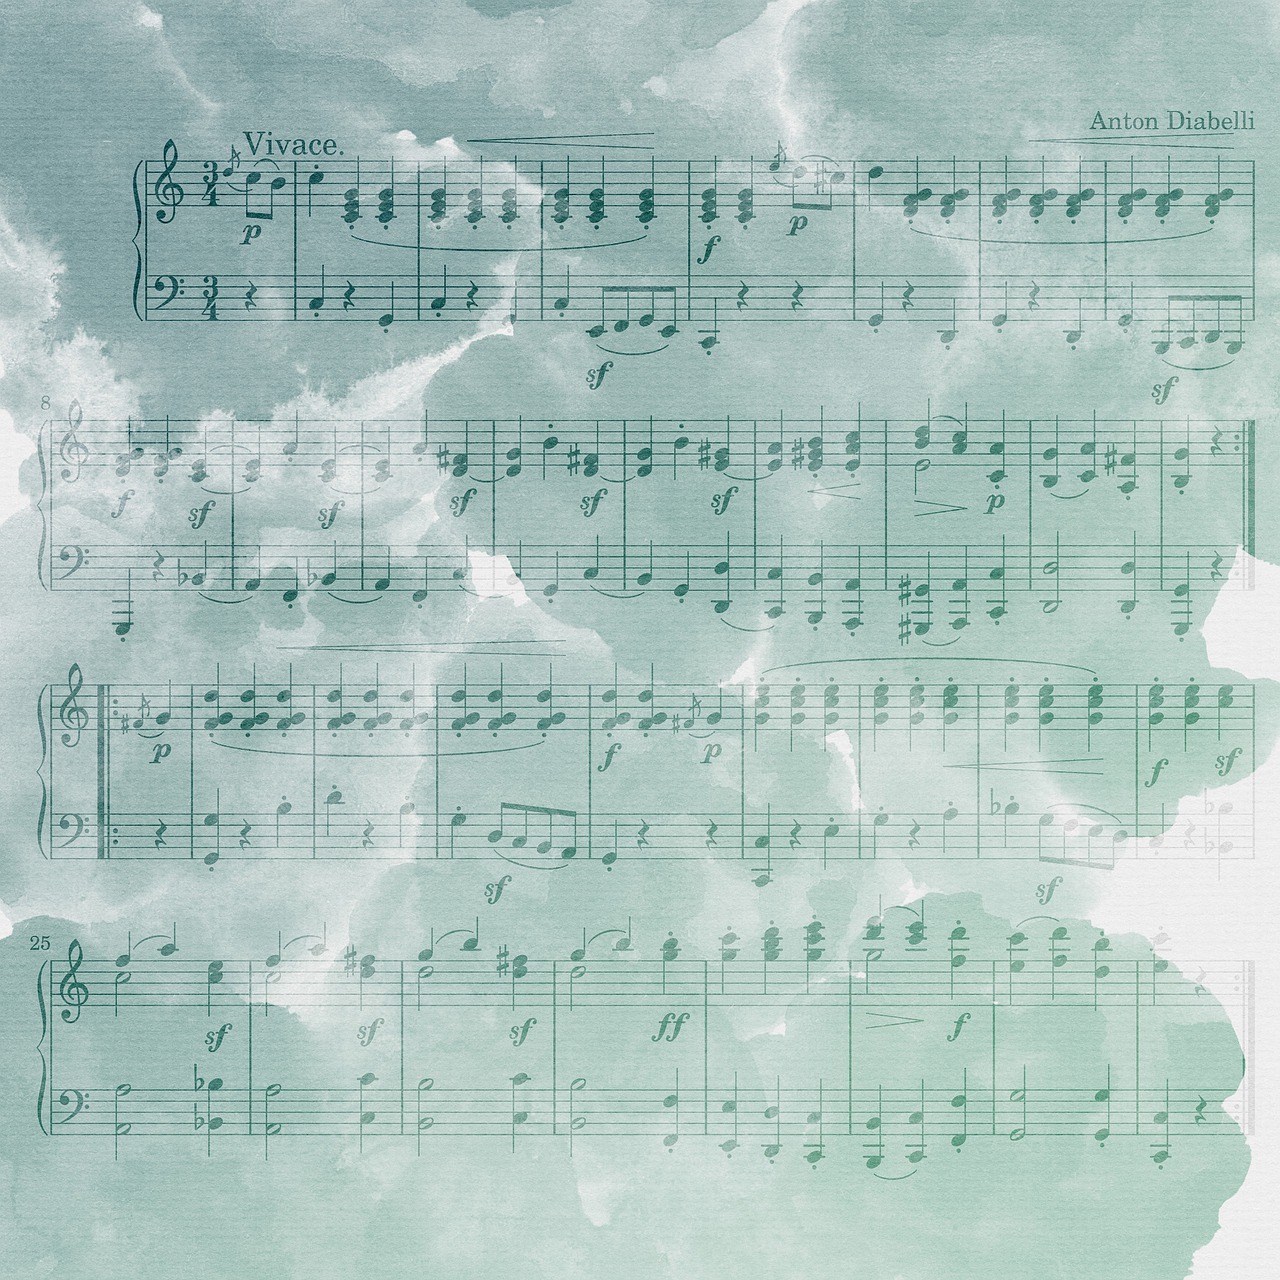 a sheet of music sitting on top of a table, by Amelia Peláez, shutterstock, baroque, floating. greenish blue, watercolor texture, misty clouds, face made of notation